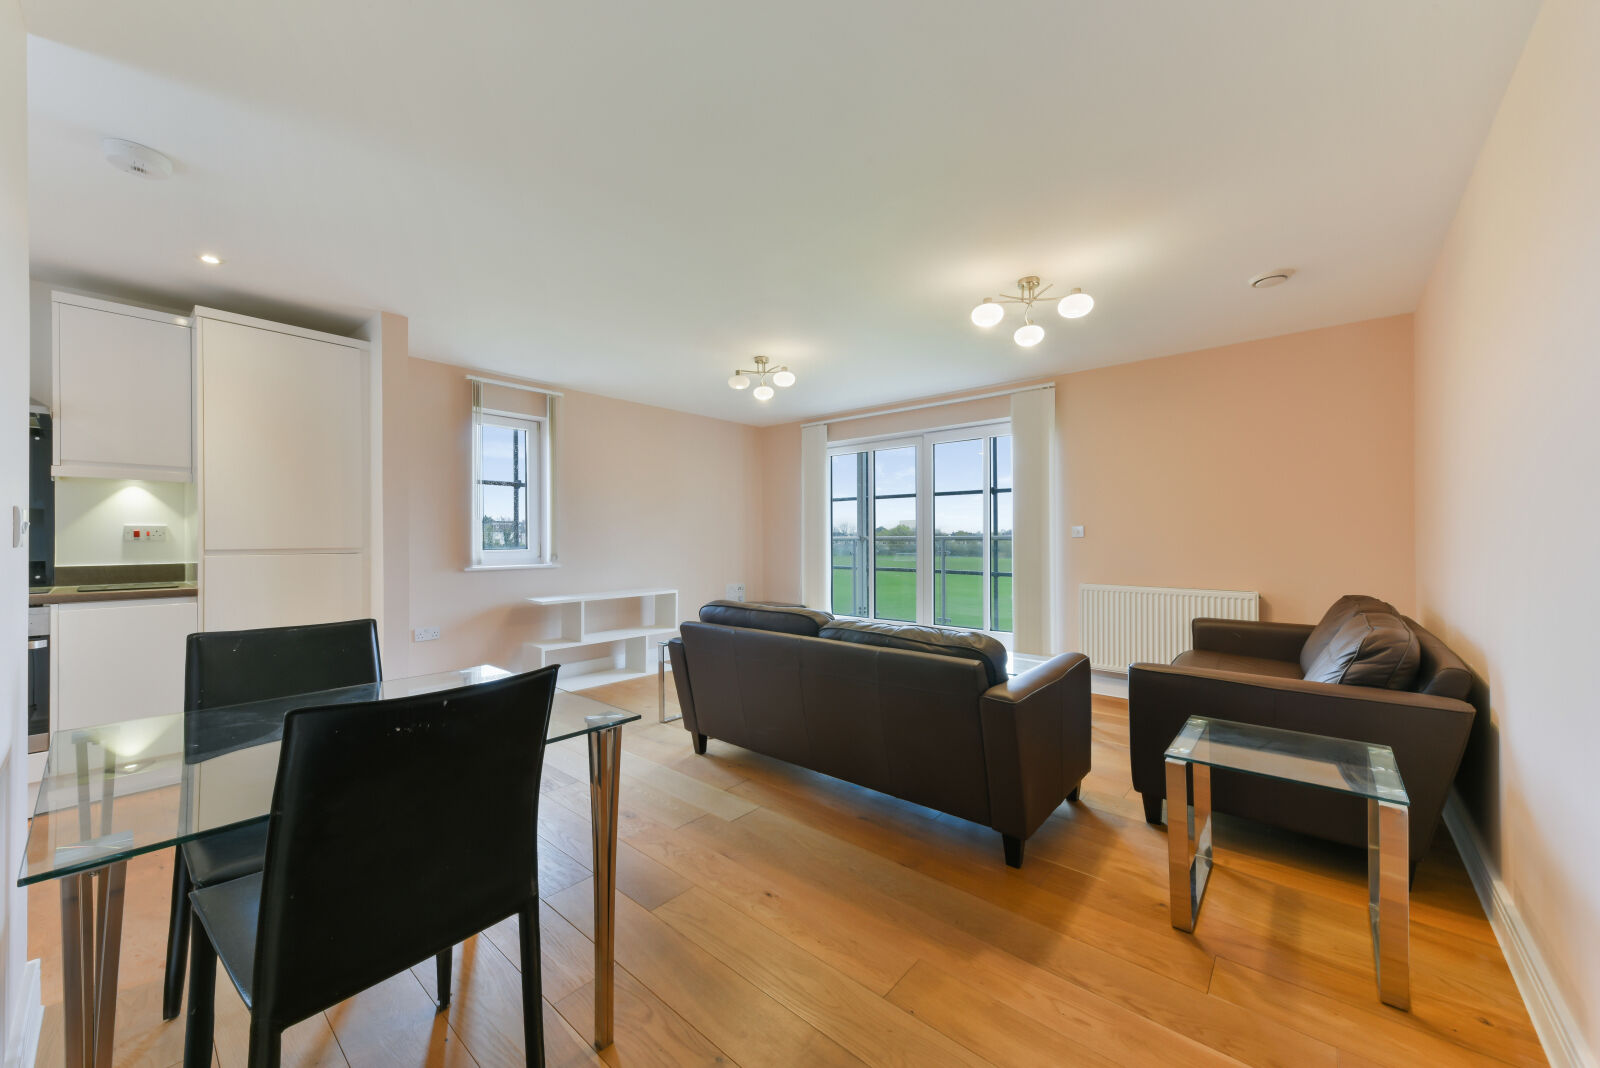 3 bedroom  flat to rent, Available now Greenview Drive, London, SW20, main image